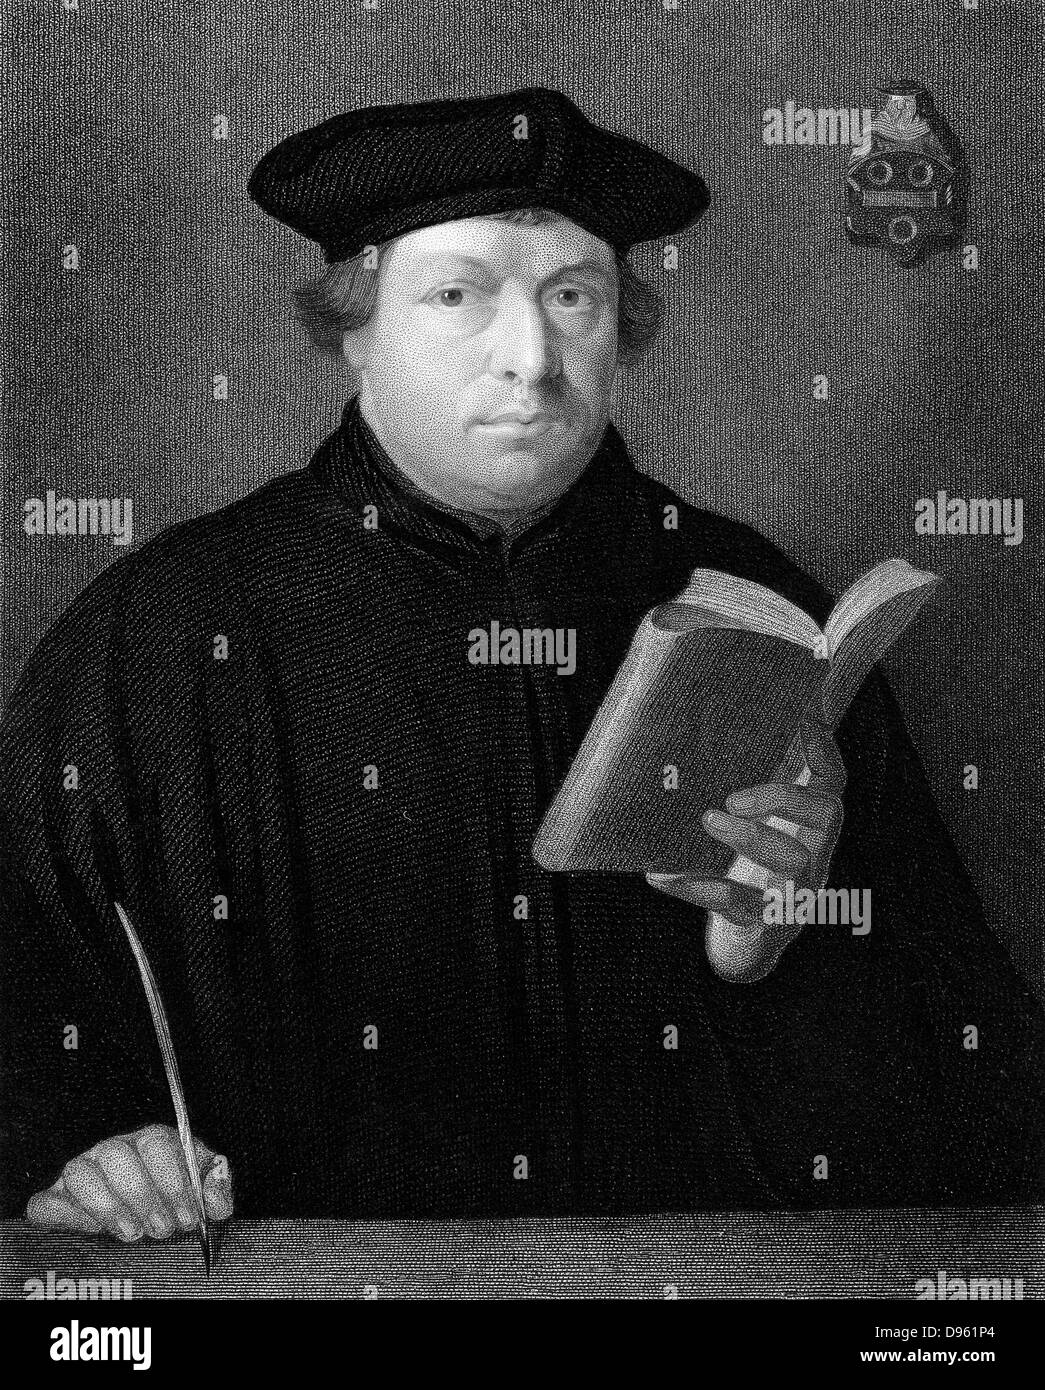 Martin Luther (1481-1546), German Protestant reformer. Engraving c1830. Stock Photo